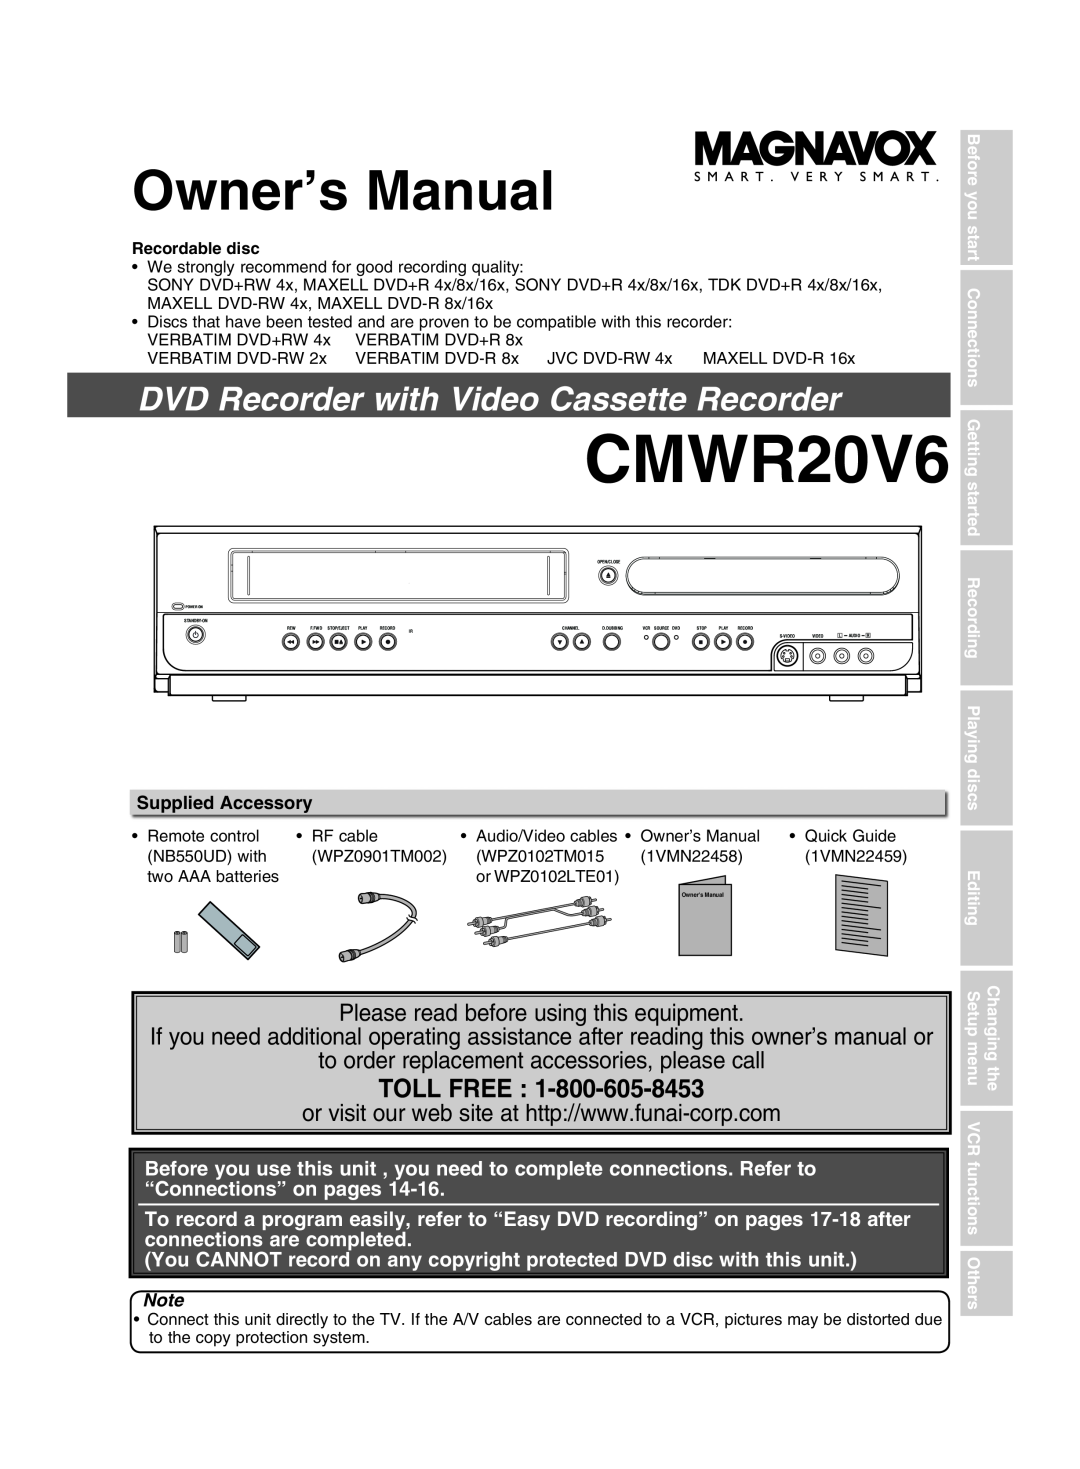 Magnavox cmwR20v6 manual Toll Free, CMWR20V6, Owner’s Manual, DVD Recorder with Video Cassette Recorder 